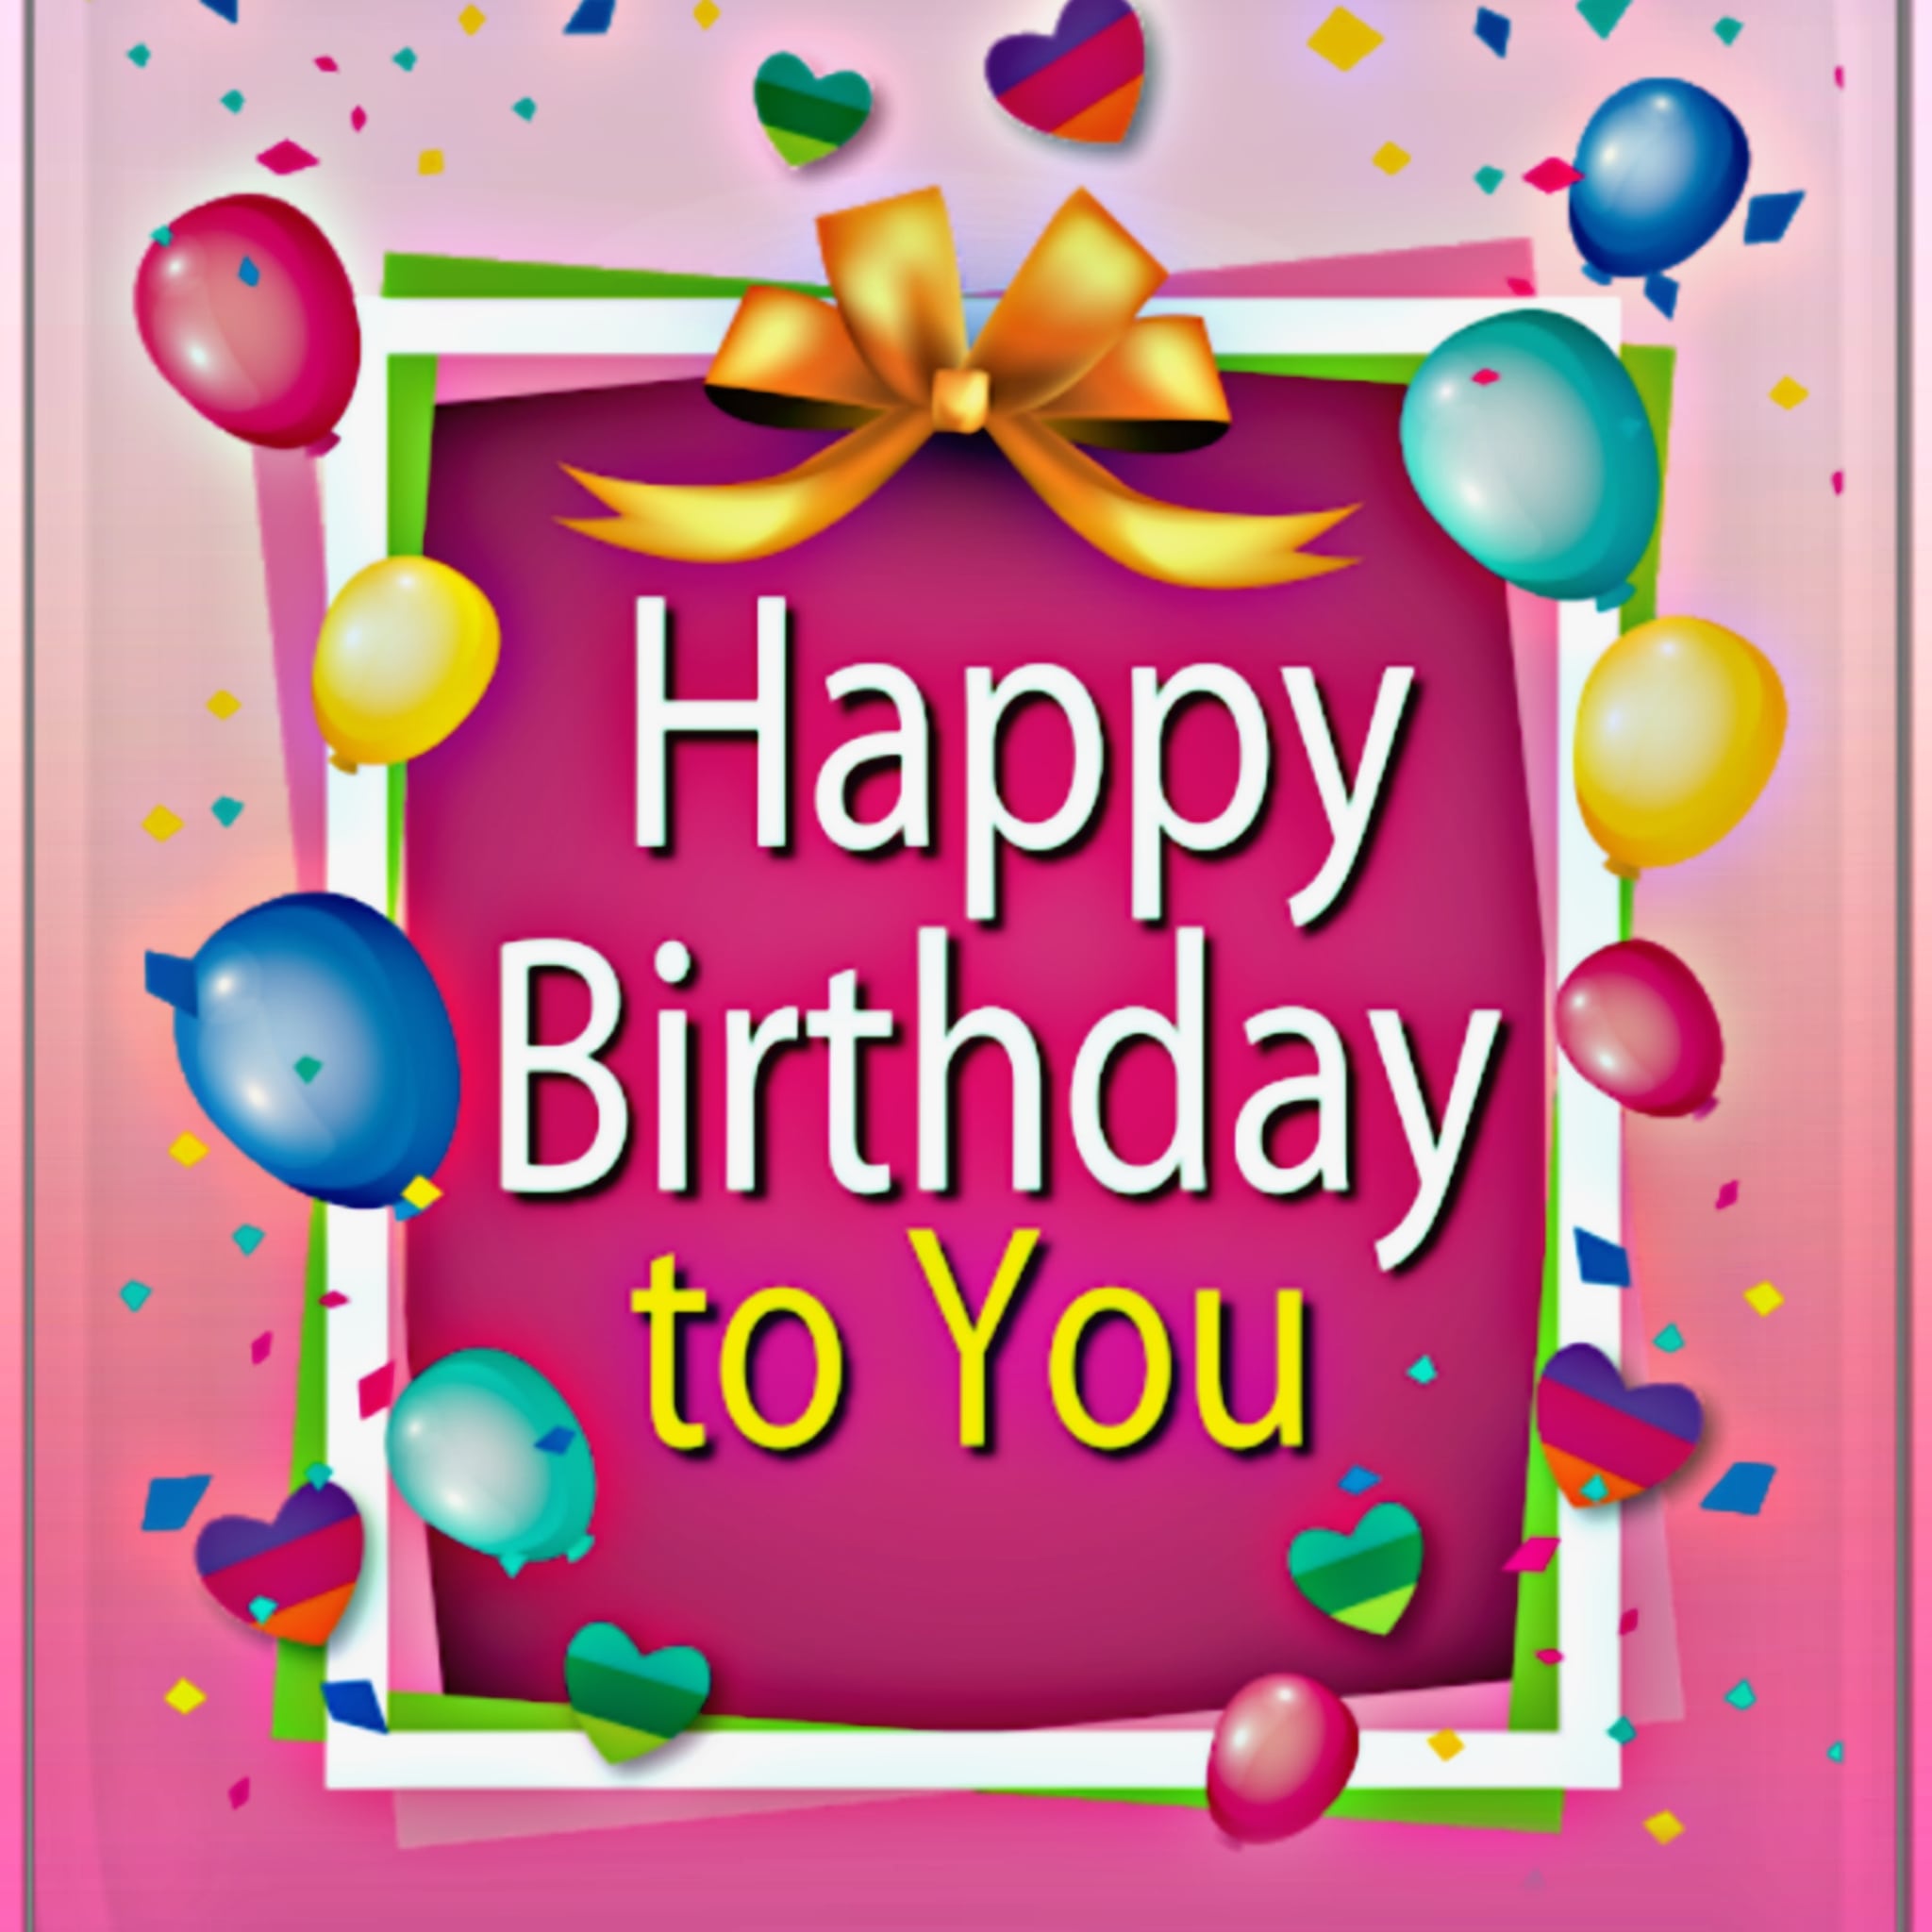 Happy Birthday Images For Her Free Happy Birthday Images For Women